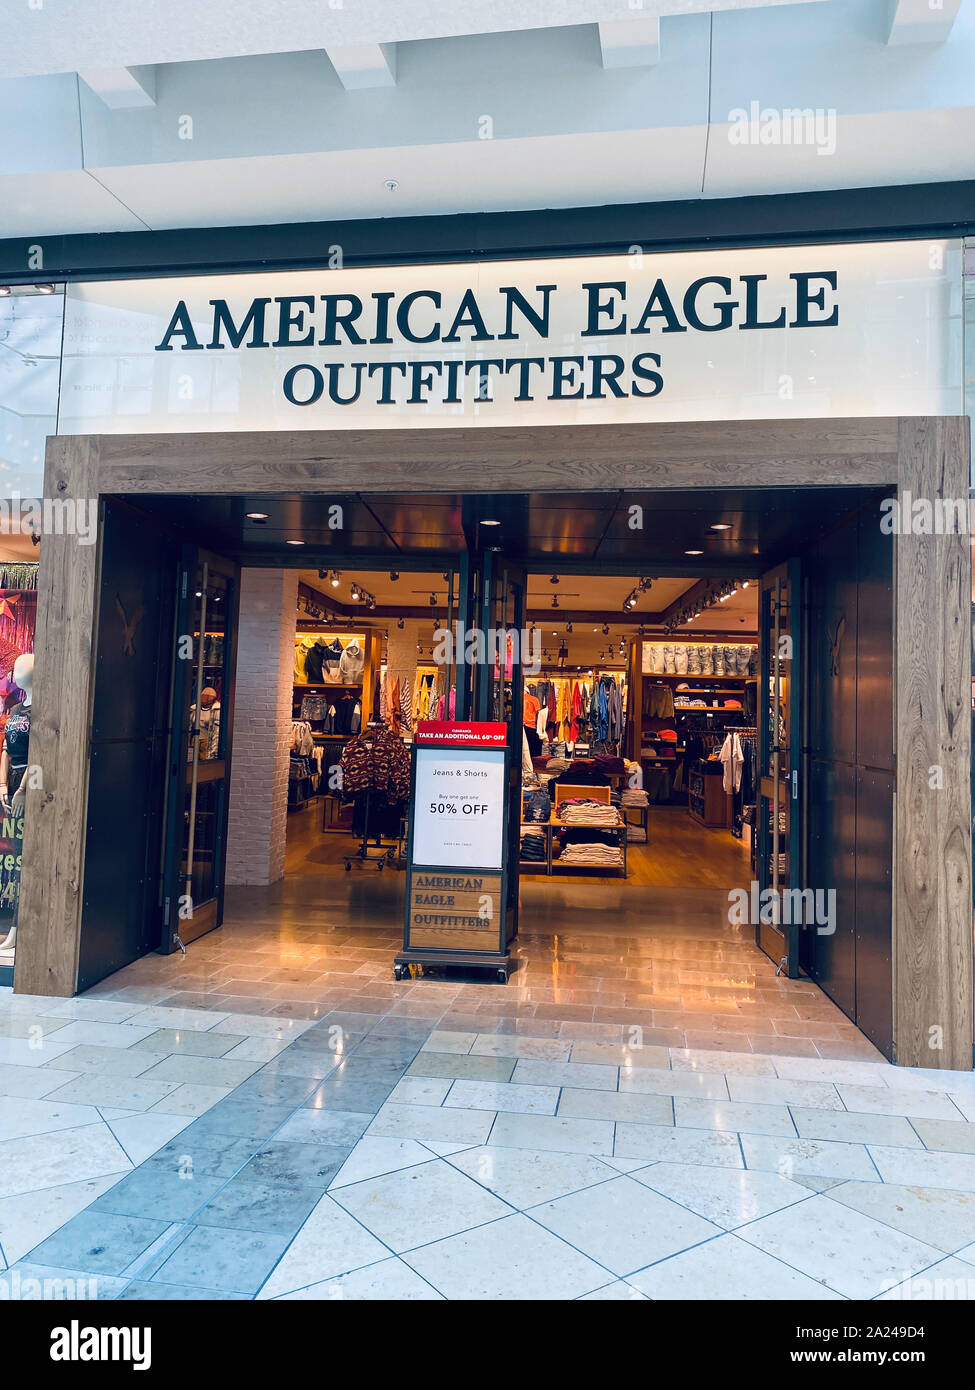 https://c8.alamy.com/comp/2A249D4/orlandoflusa-93019an-american-eagle-clothing-retail-store-in-an-indoor-mall-american-eagle-outfitters-is-an-american-lifestyle-brand-aimed-at-co-2A249D4.jpg